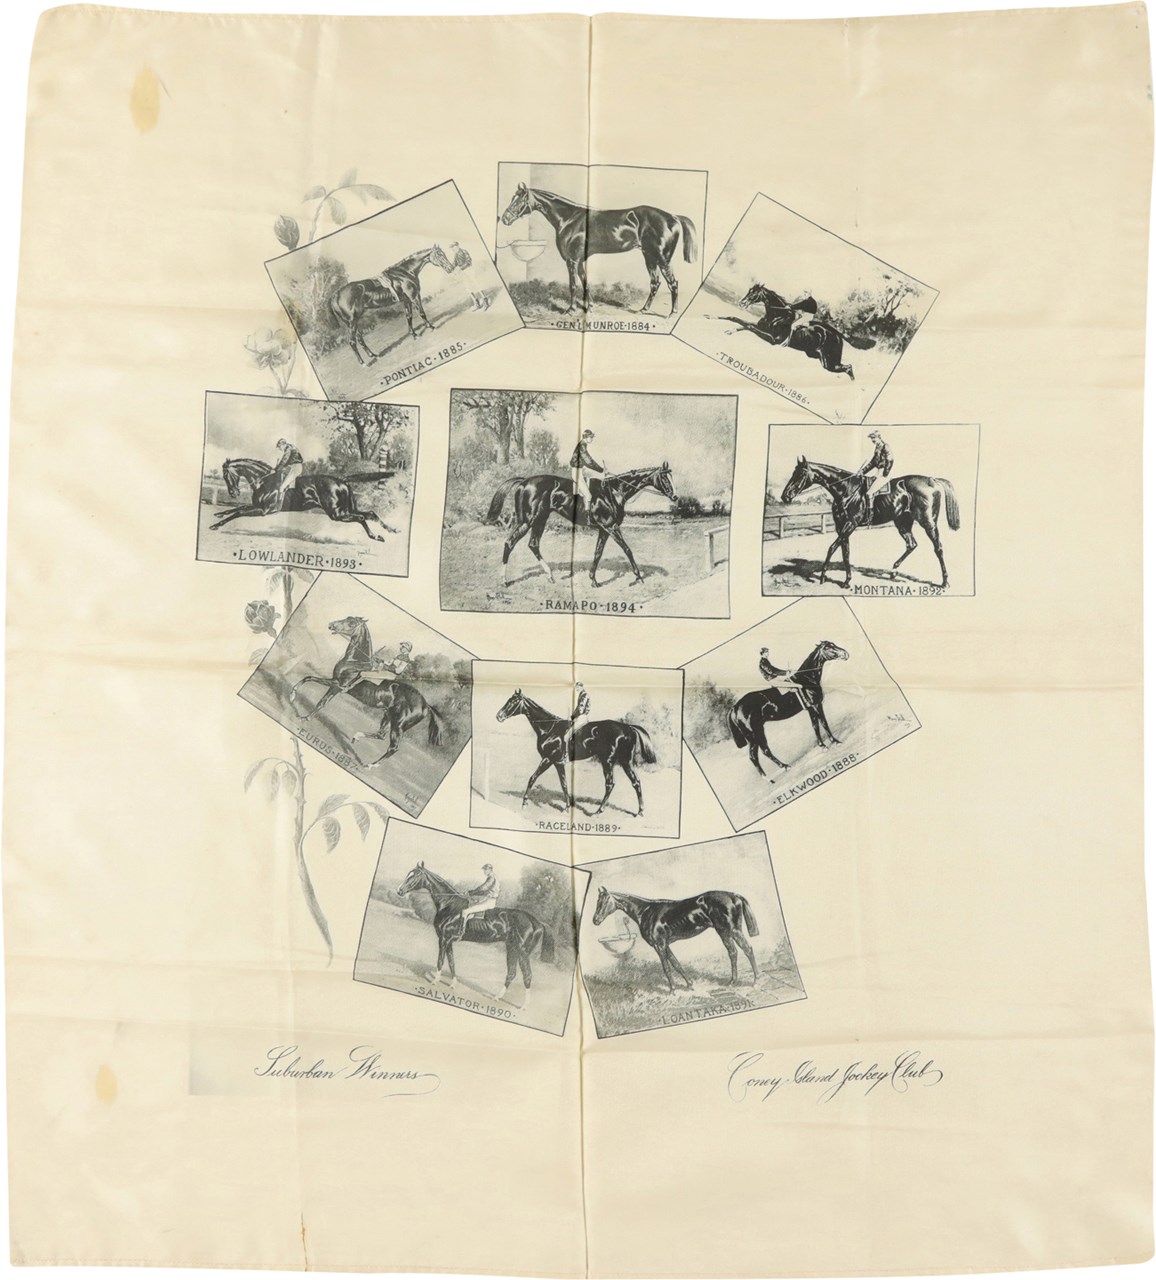 Horse Racing - Stunning Silk Showing the 11 Winners of the Suburban Handicap from 1884 Through 1894